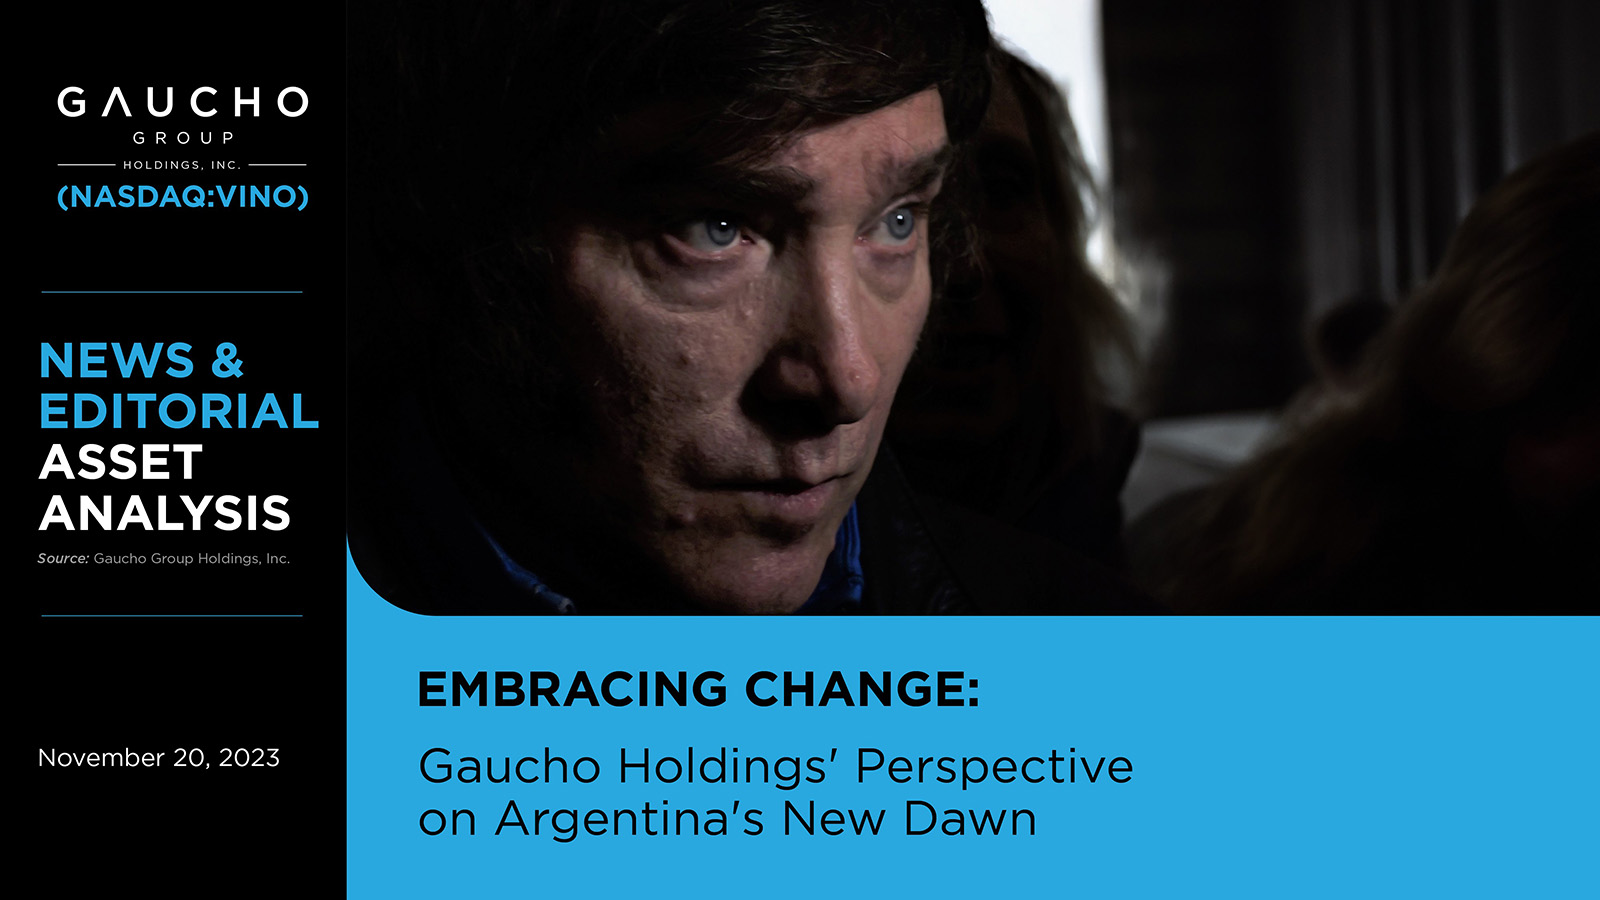 November 20, 2023  EMBRACING CHANGE:  Gaucho Holdings' Perspective on Argentina's New Dawn